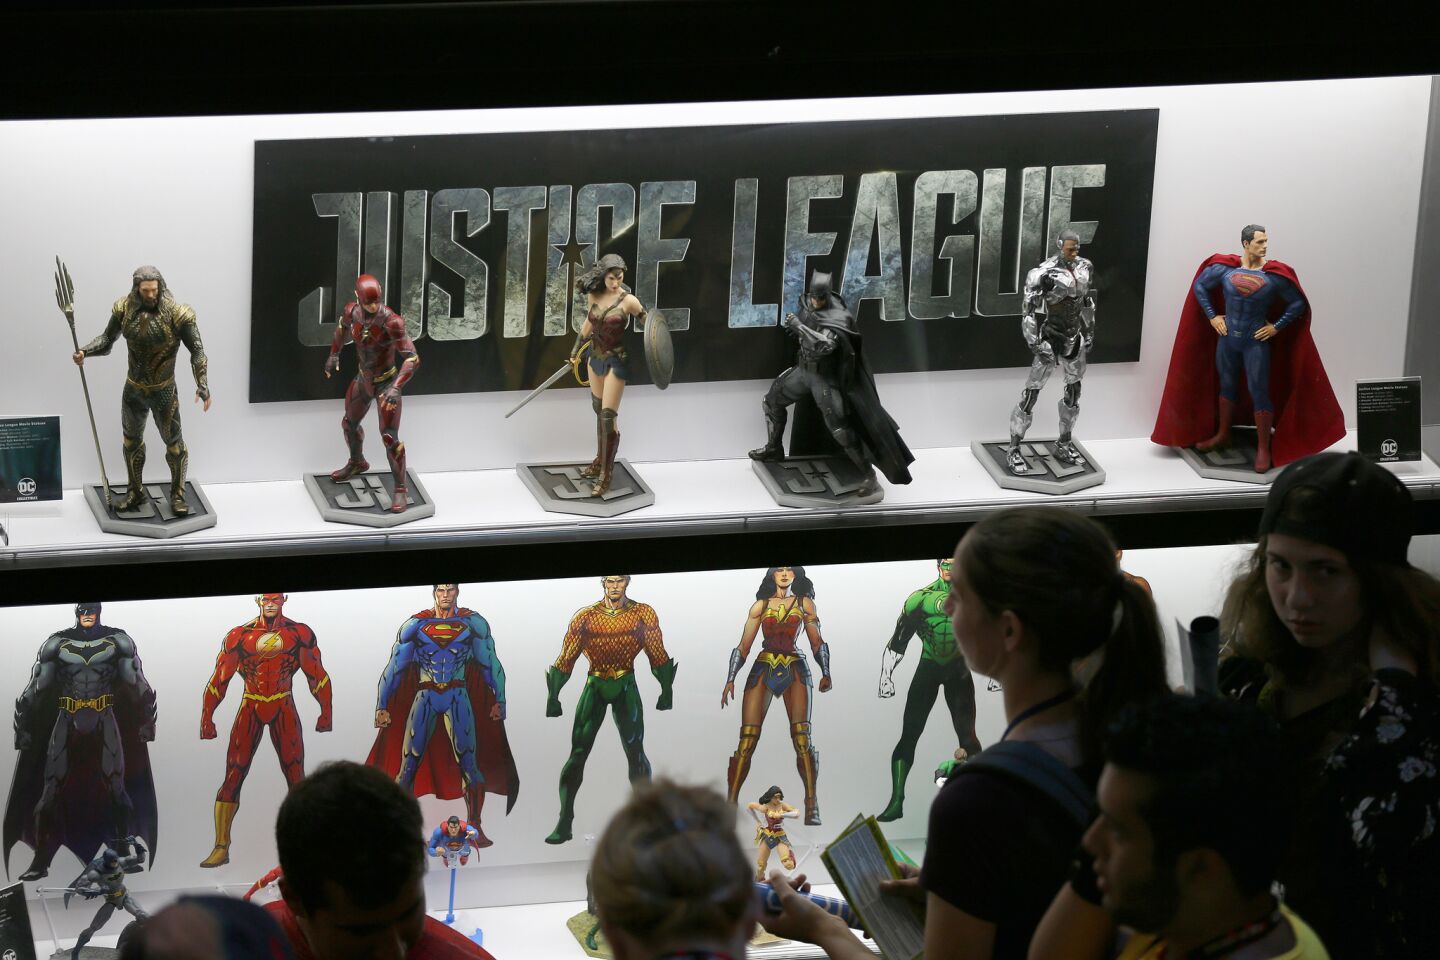 Justice League figurines on display at Comic-Con International in San Diego on July 21, 2017.